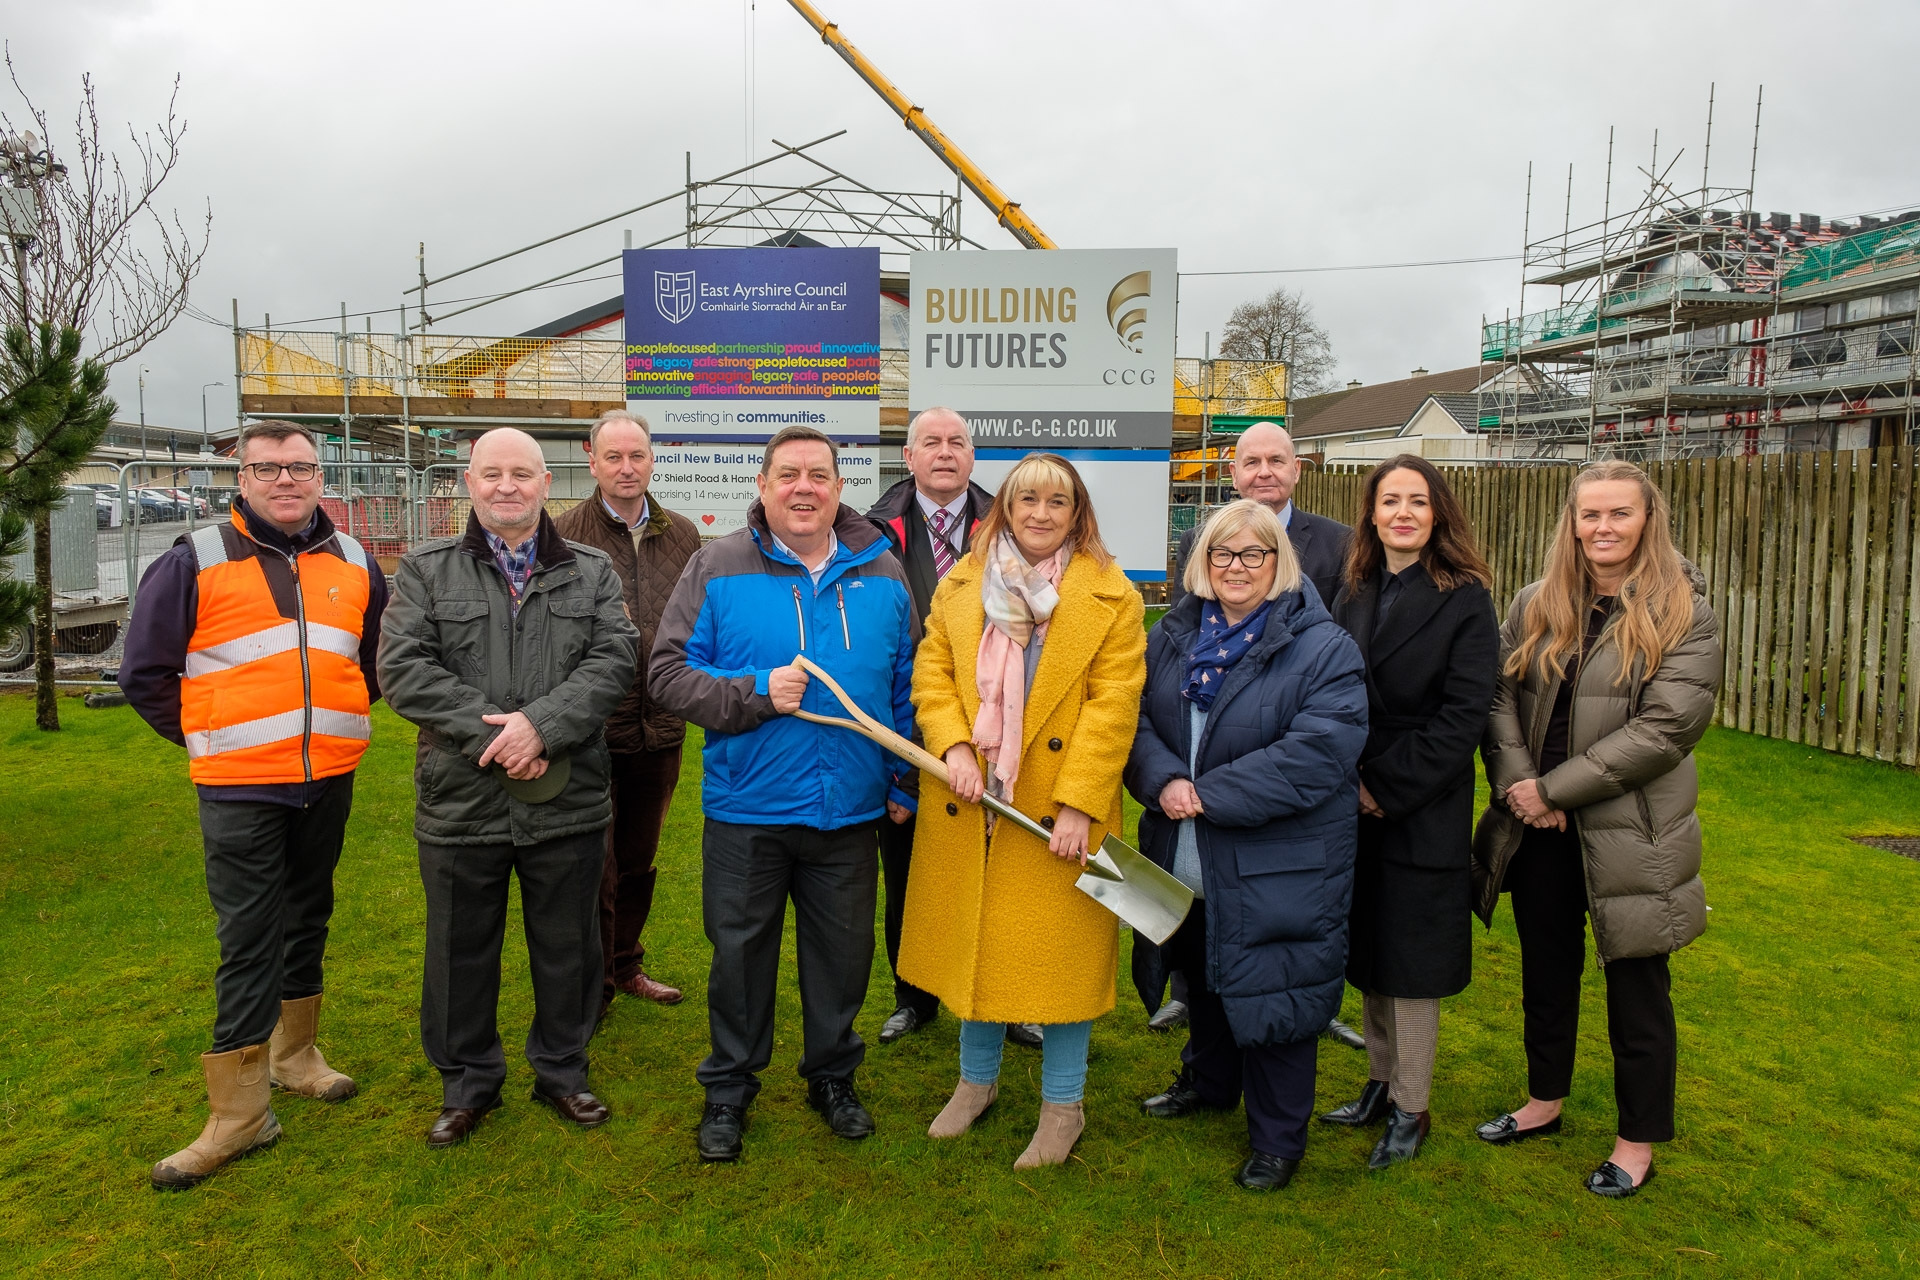 CCG starts work on two East Ayrshire Council housing developments